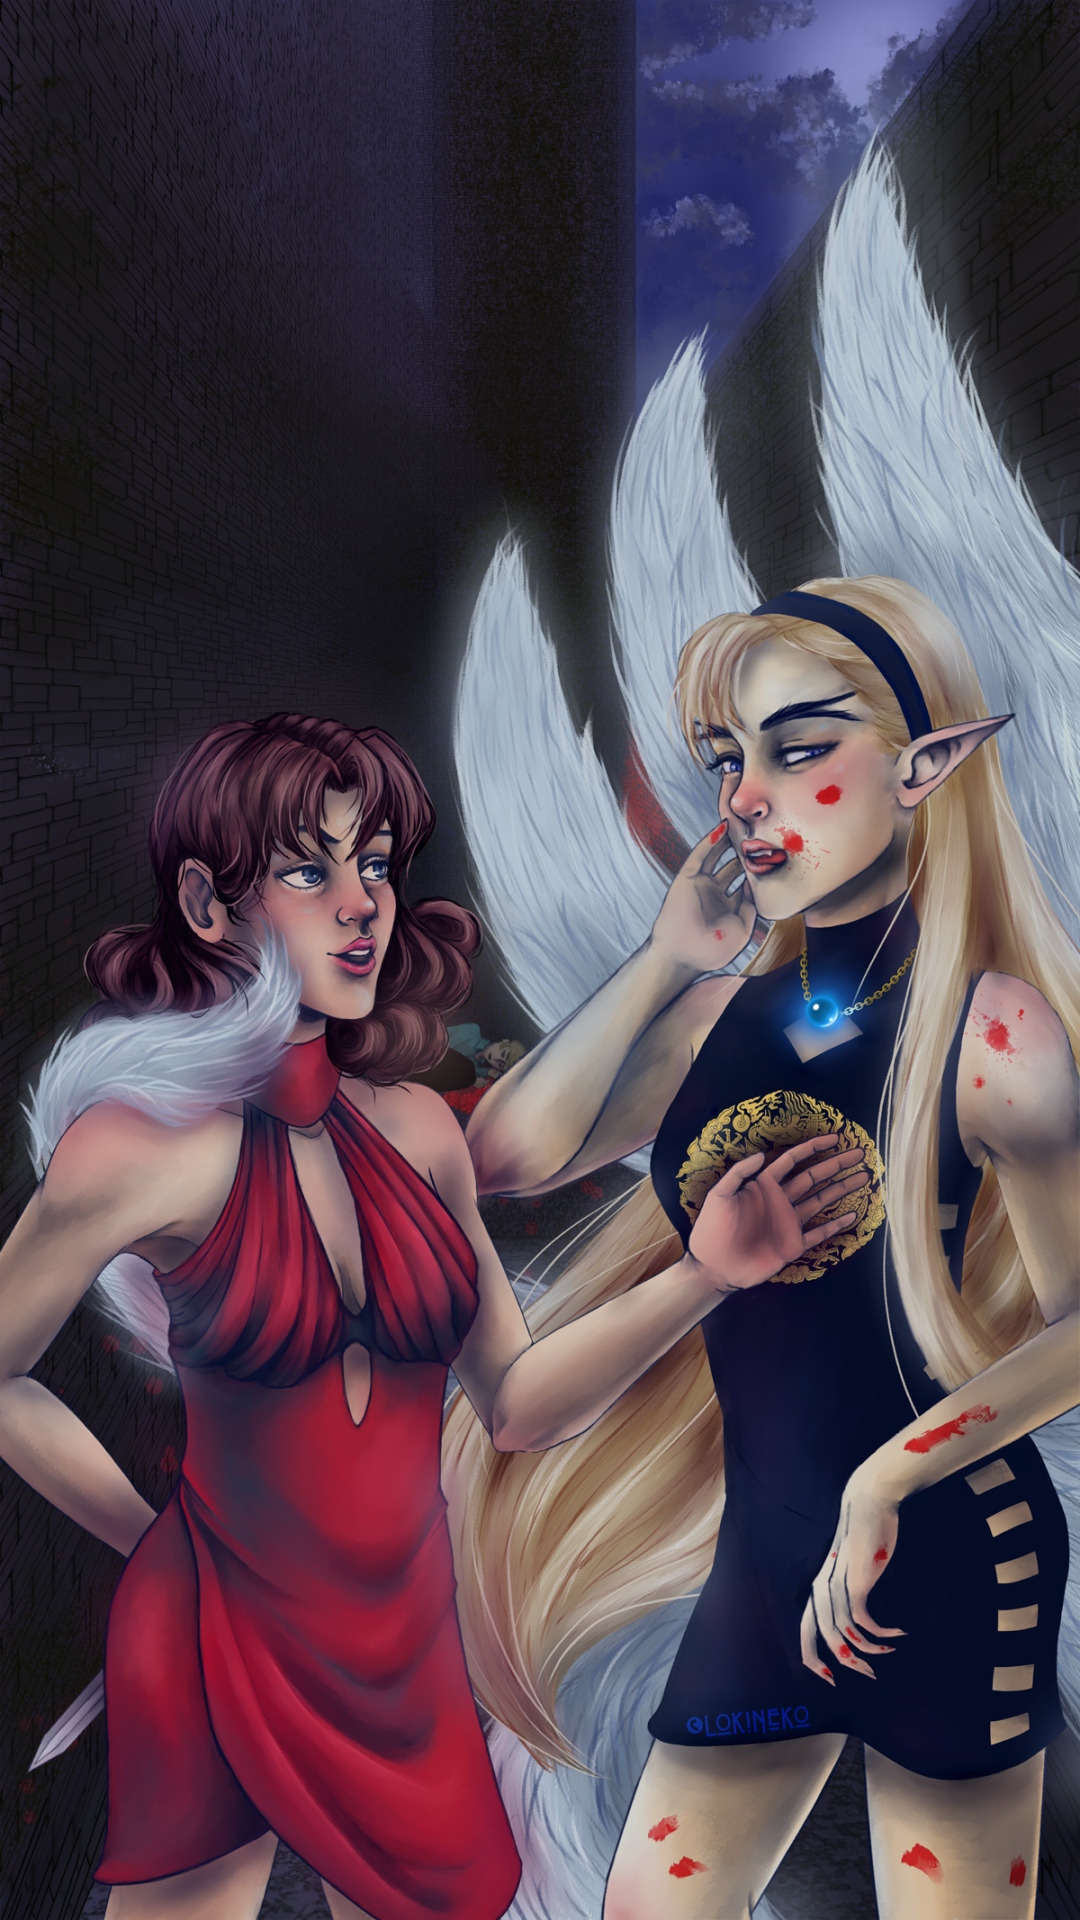 Here’s my second piece for the 2021 Rhythm Generation zine (mature part!). Dorothy is a gumiho and Cathy is her girlfriend/wife who lures creeps from the nearby clubs to shady back alleyways for liver-eating shenanigans.I’m still tickled that I get into adult zines for psychological horror and blood. #gundam wing#gundamw#dorothy catalonia#catherine bloom #dorothy x cathy #gundamzine #gundam wing zine #my art#digital